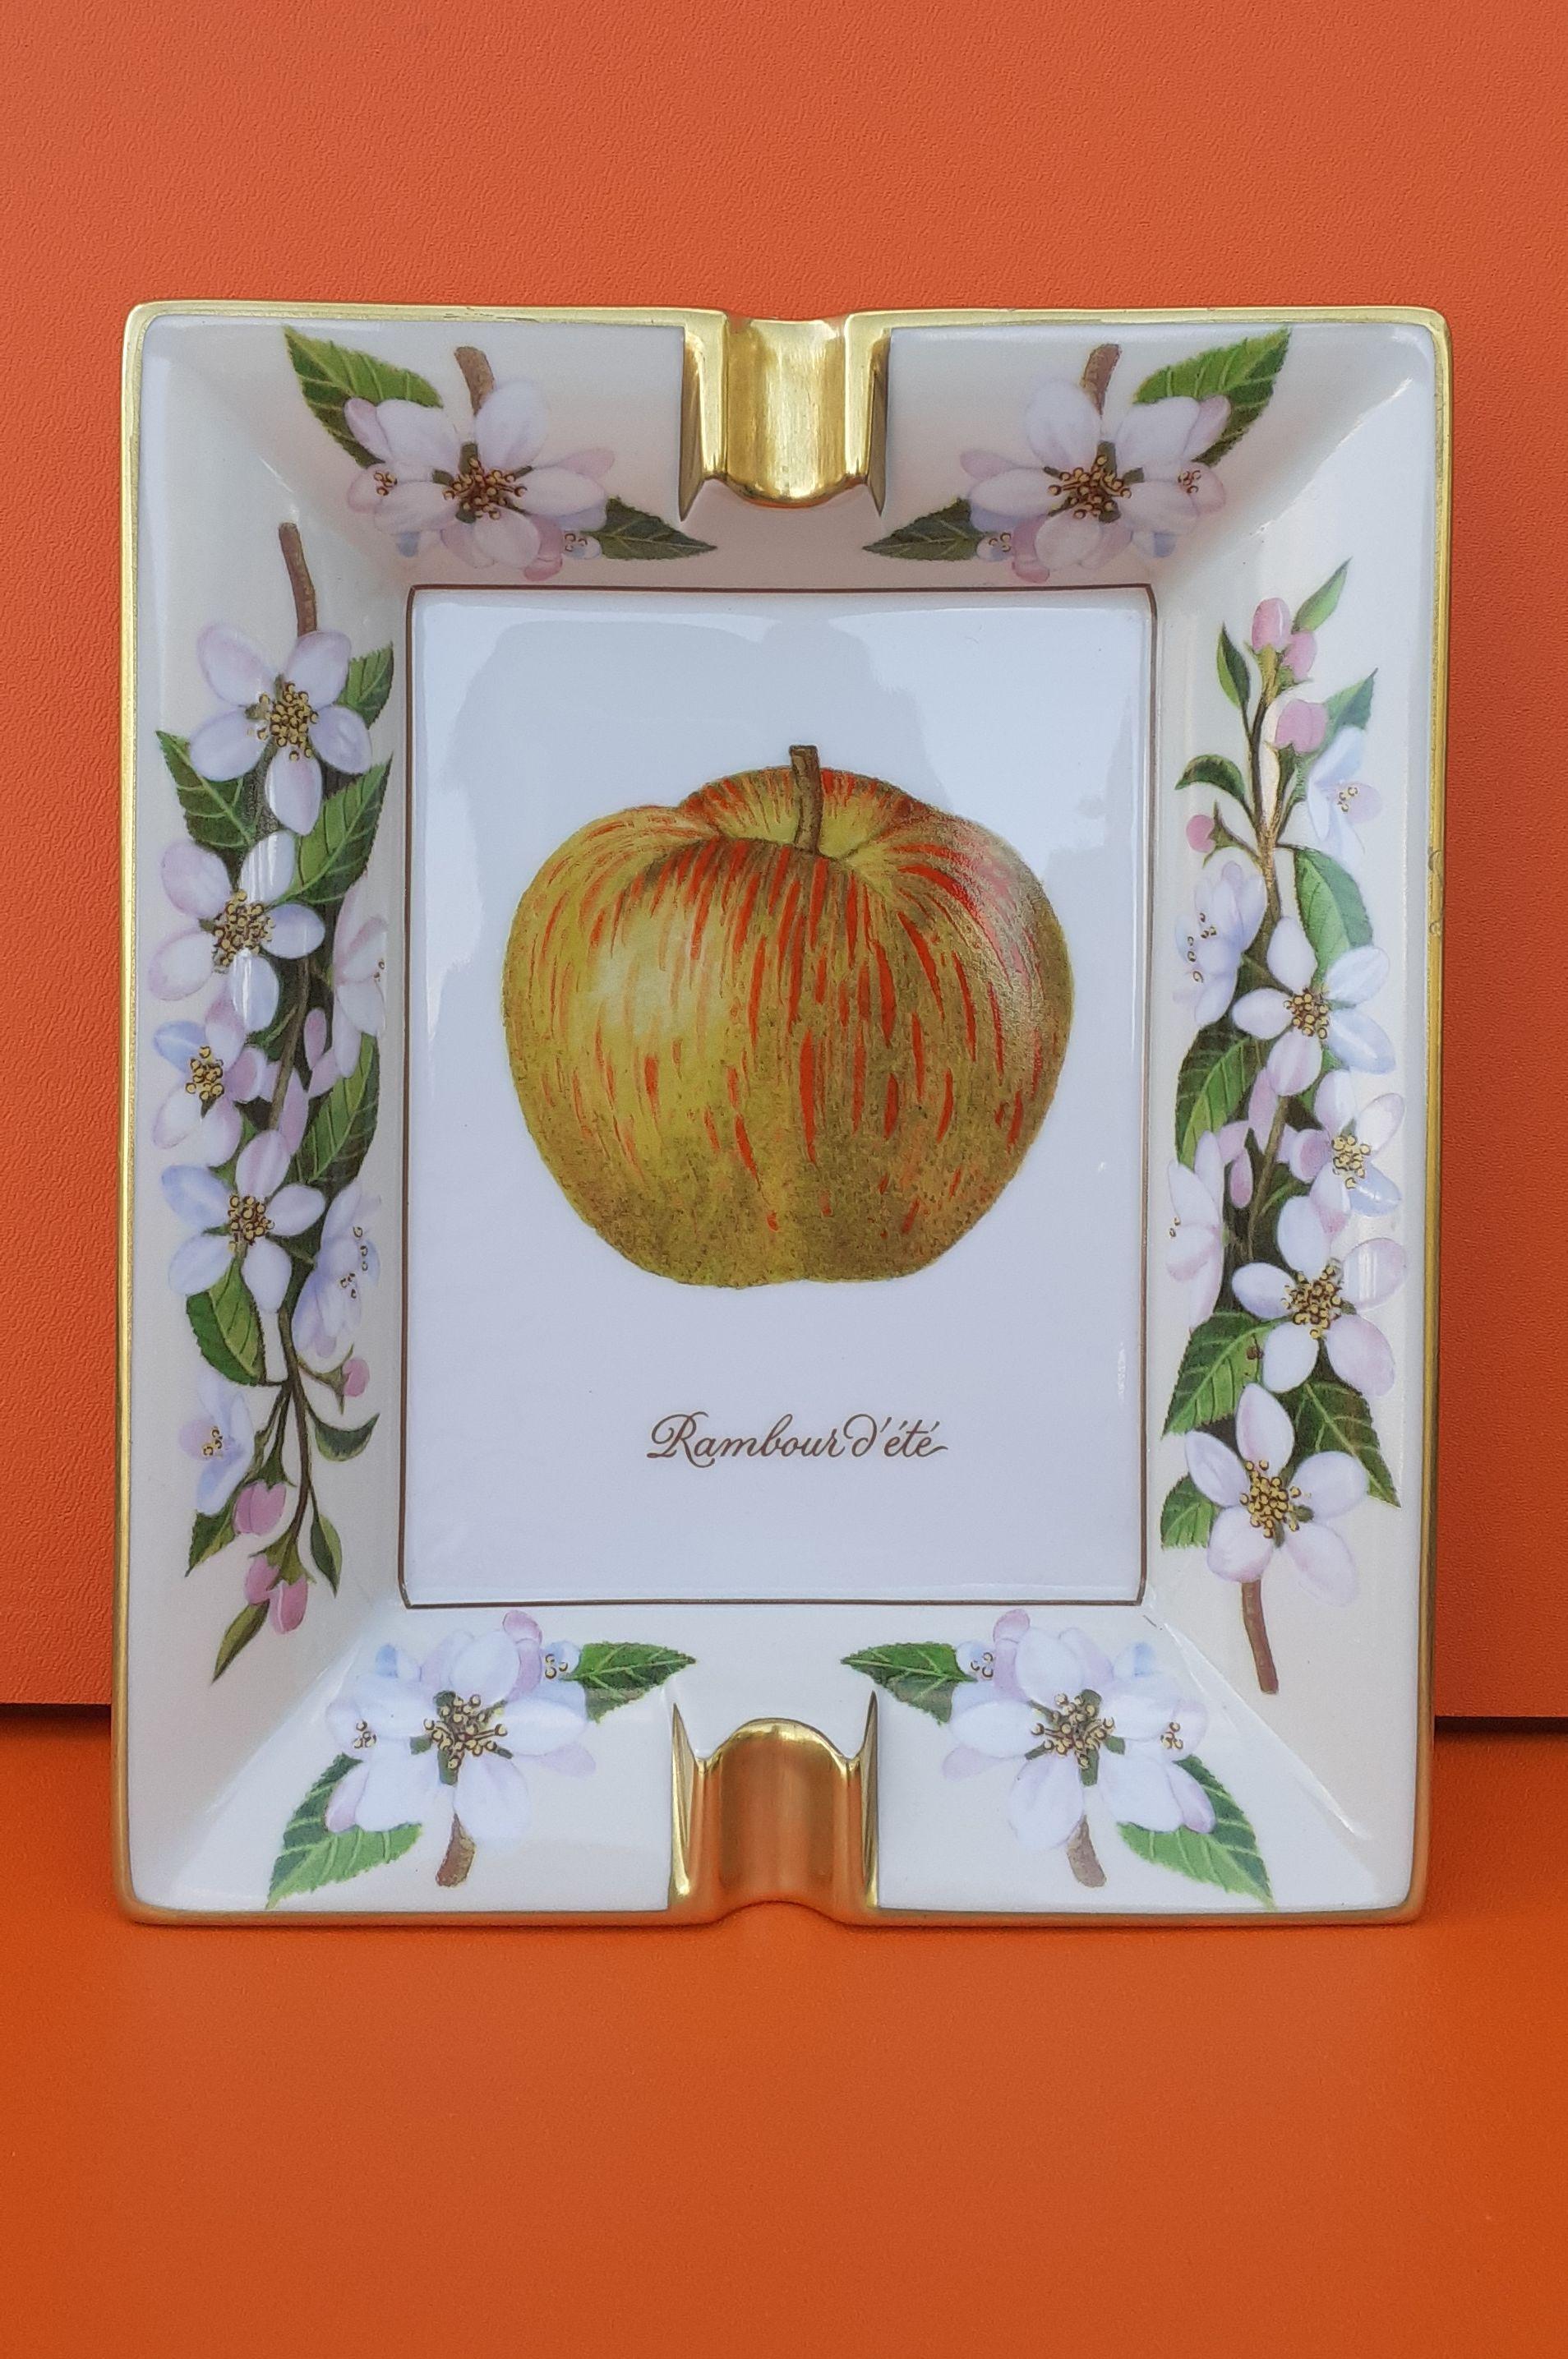 Gorgeous and Rare Authentic Hermès Ashtray

Print: Apple and Flowers 

Made in France

Made of porcelain with golden edges

Colorways: White, Green, Red, Pink

Beige suede leather at back, 